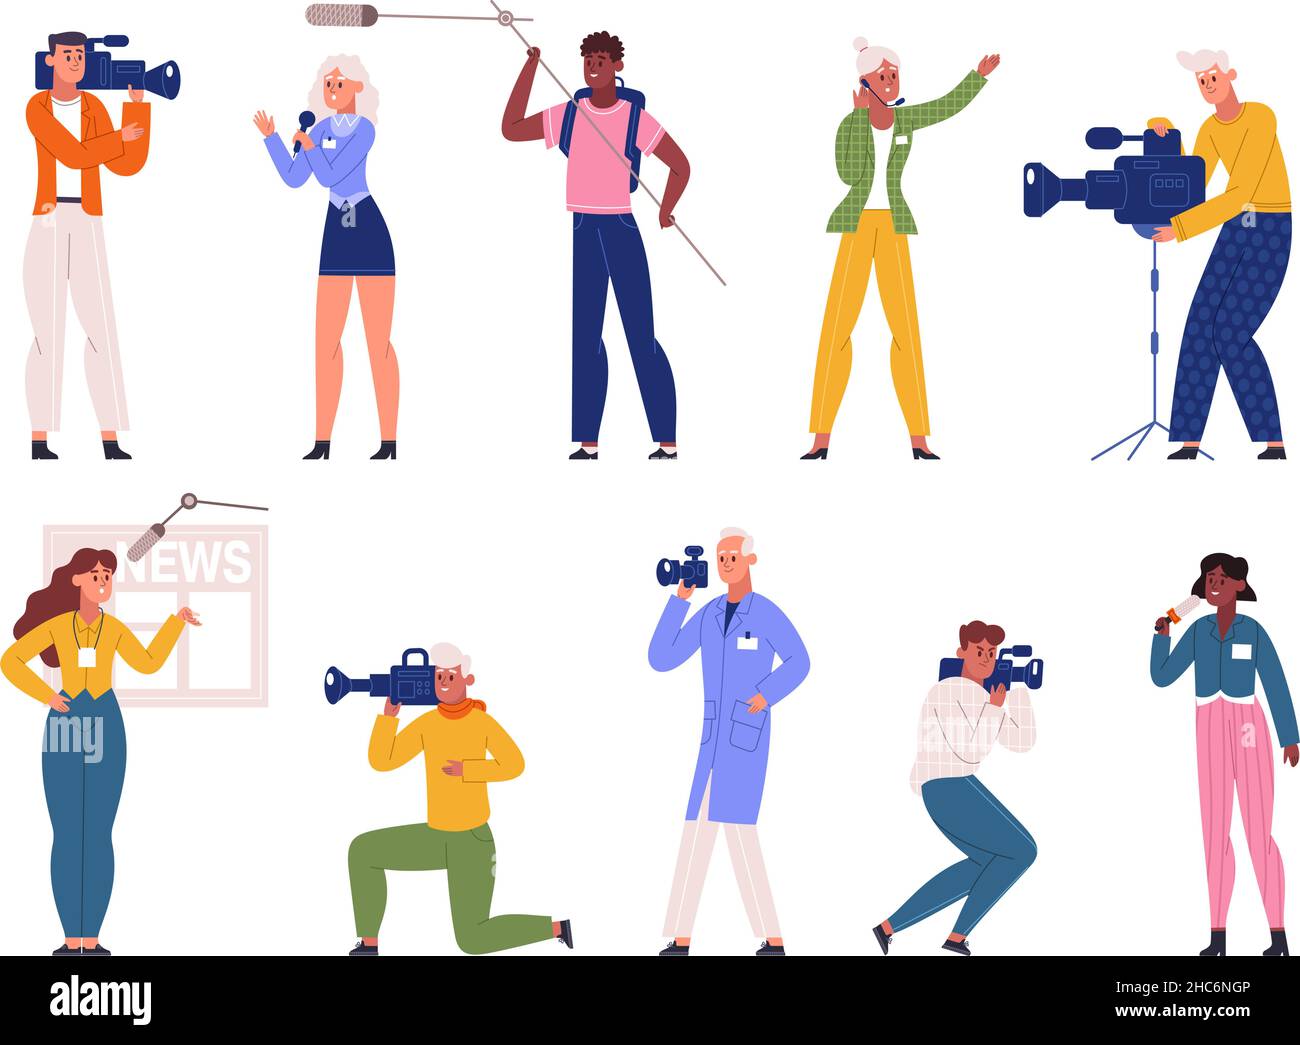 Reporters, journalists, professional photographers and tv broadcast videographers characters. Paparazzi and program news reporters vector illustration Stock Vector